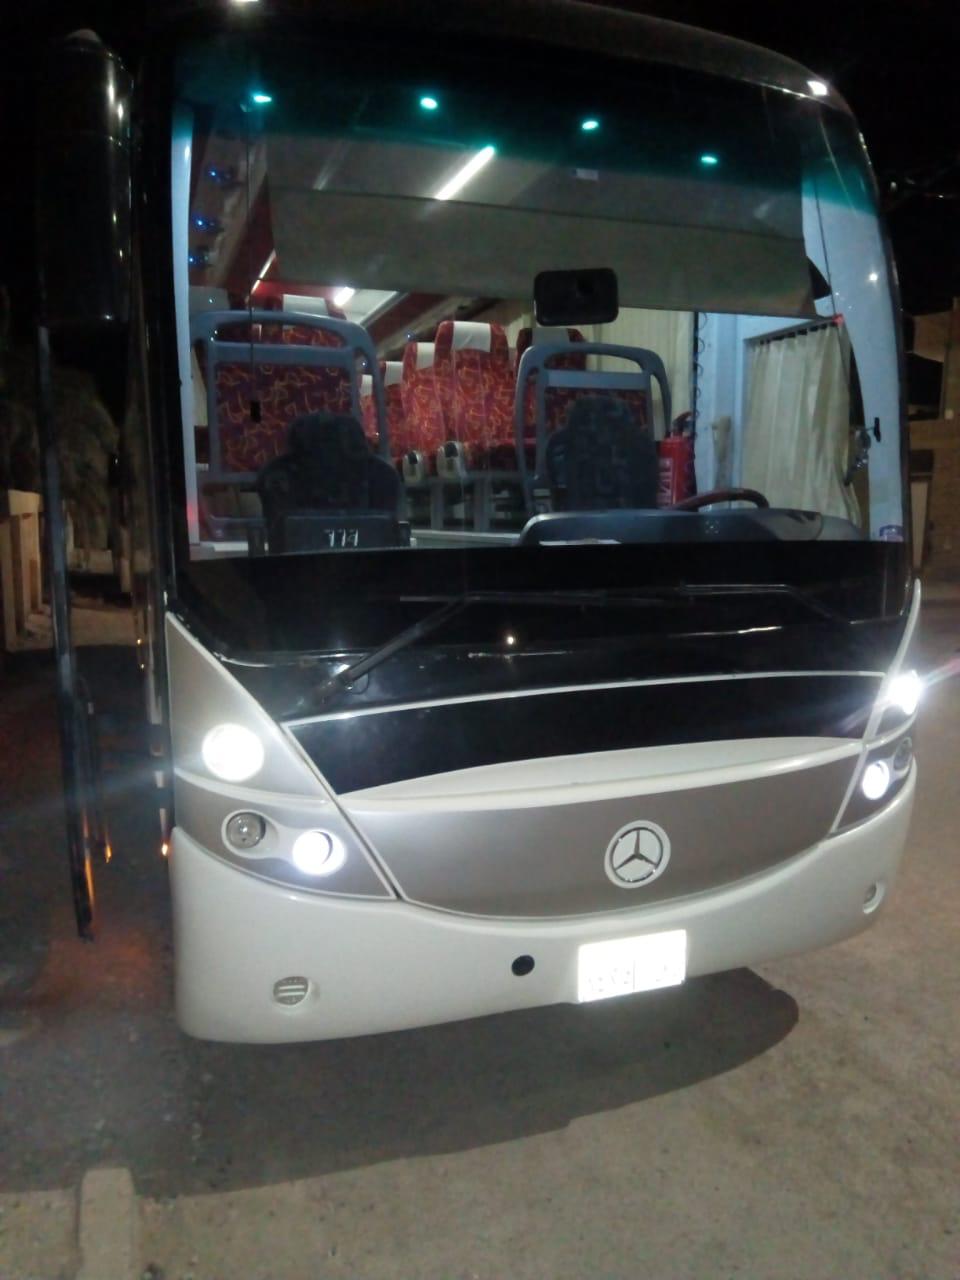 The most powerful tourist bus rental company in Hurghada